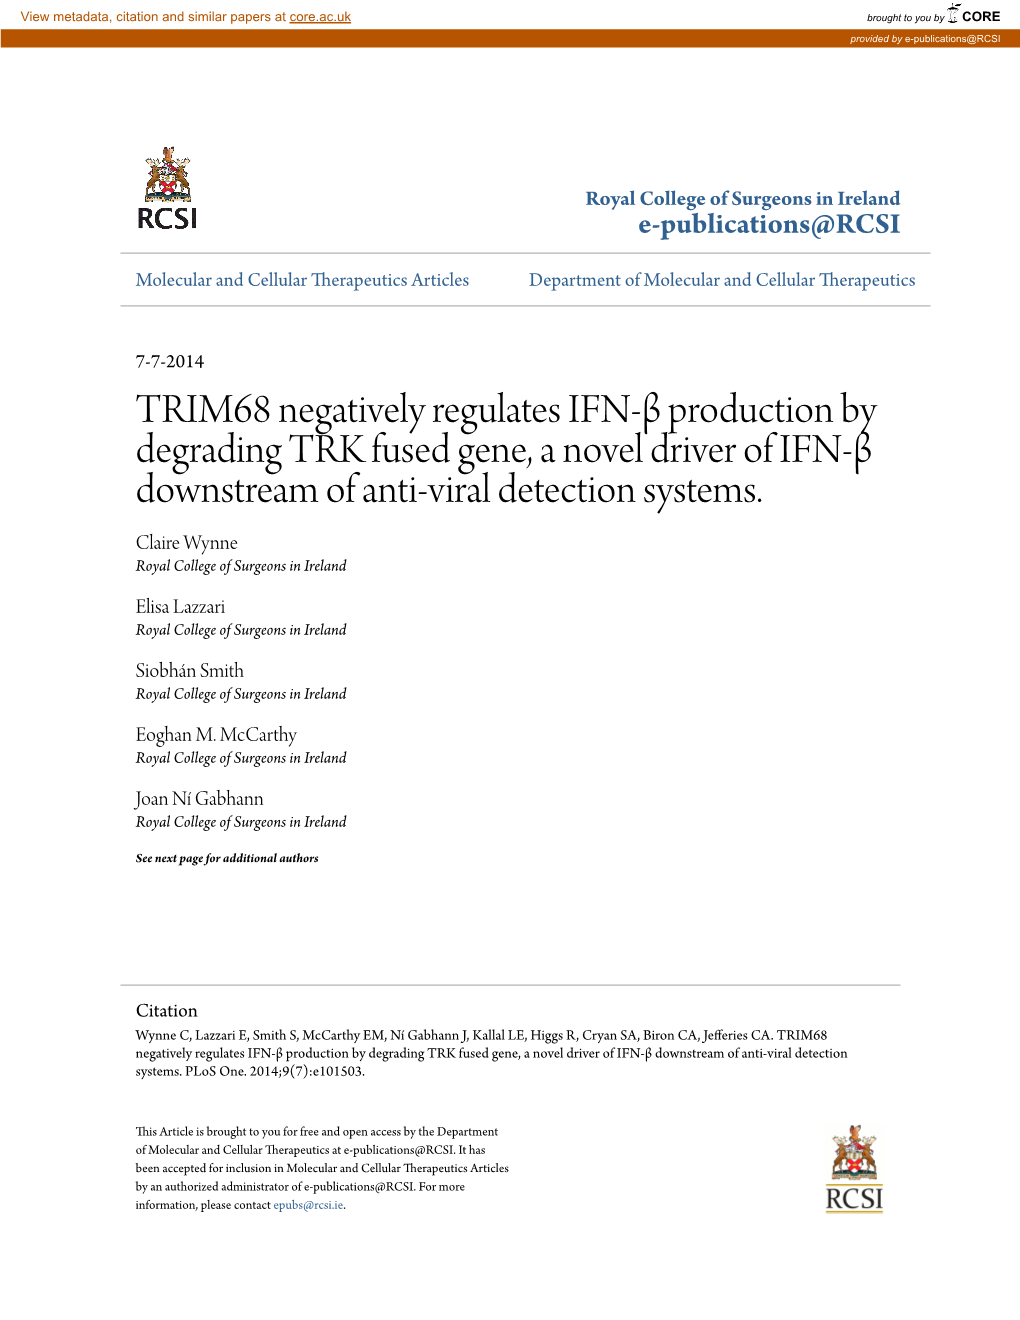 TRIM68 Negatively Regulates IFN-Β Production by Degrading TRK Fused Gene, a Novel Driver of IFN-Β Downstream of Anti-Viral Detection Systems